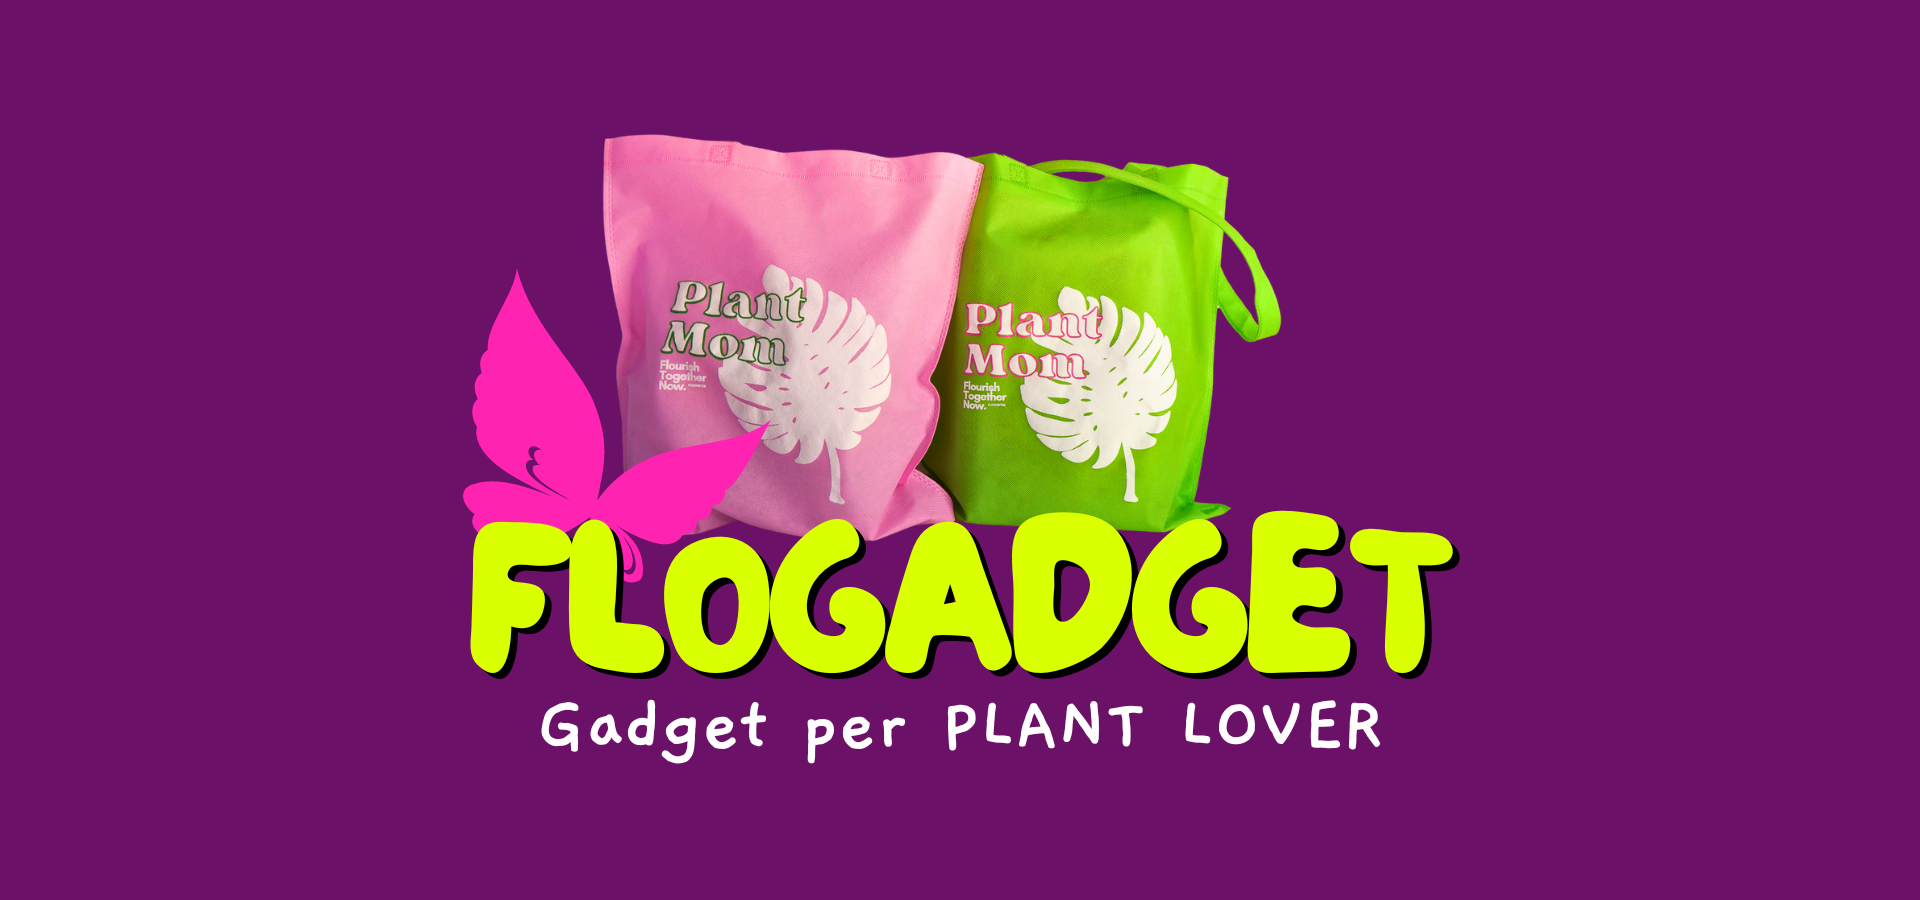 FLOGadget collection